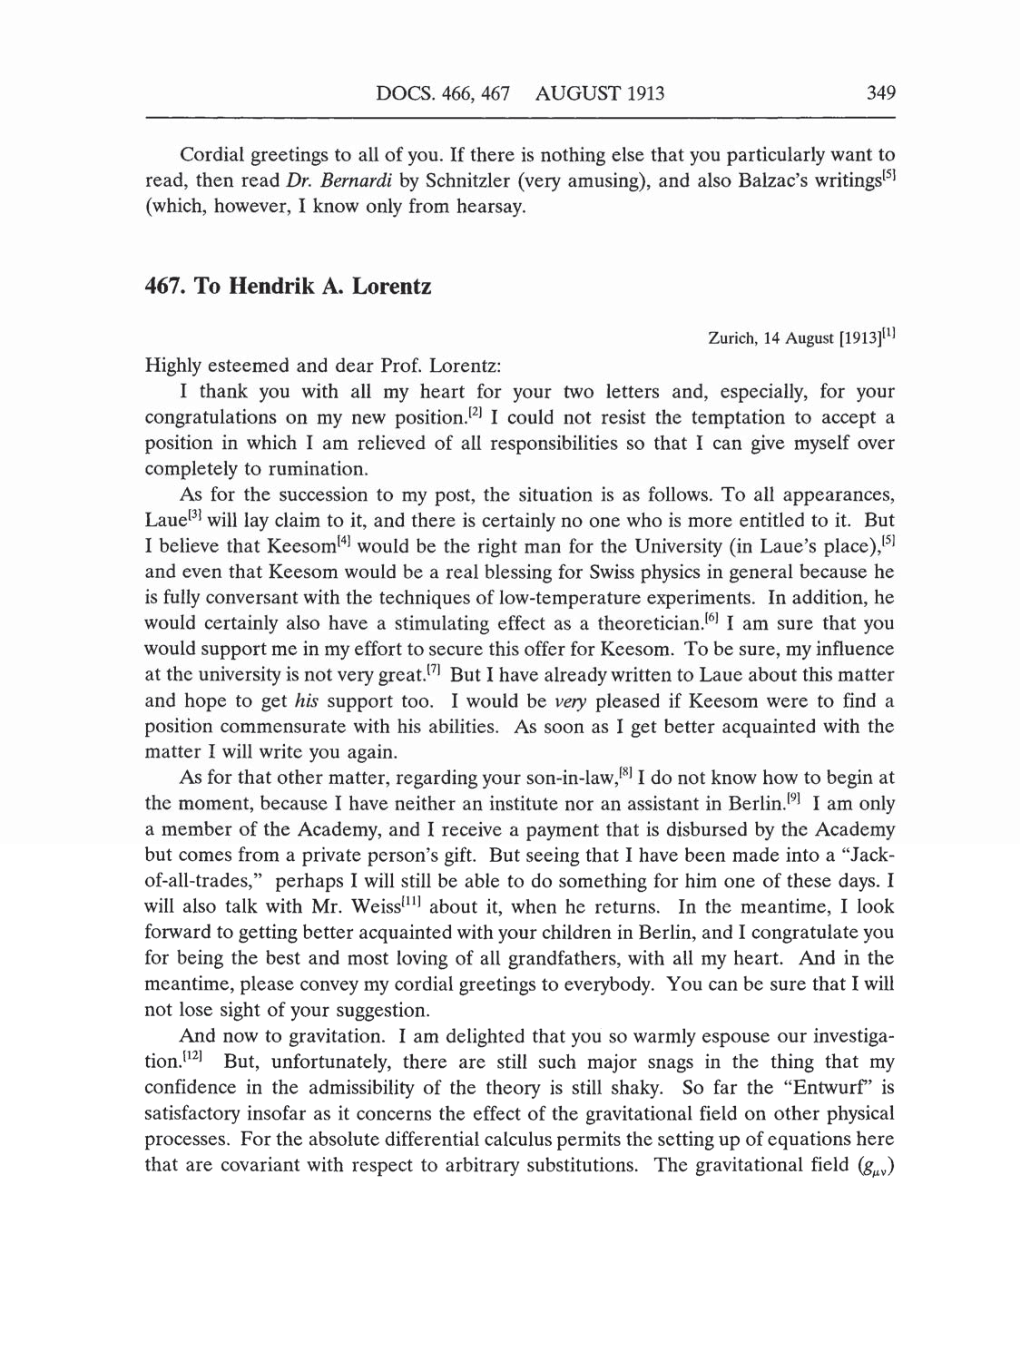 Volume 5: The Swiss Years: Correspondence, 1902-1914 (English translation supplement) page 349